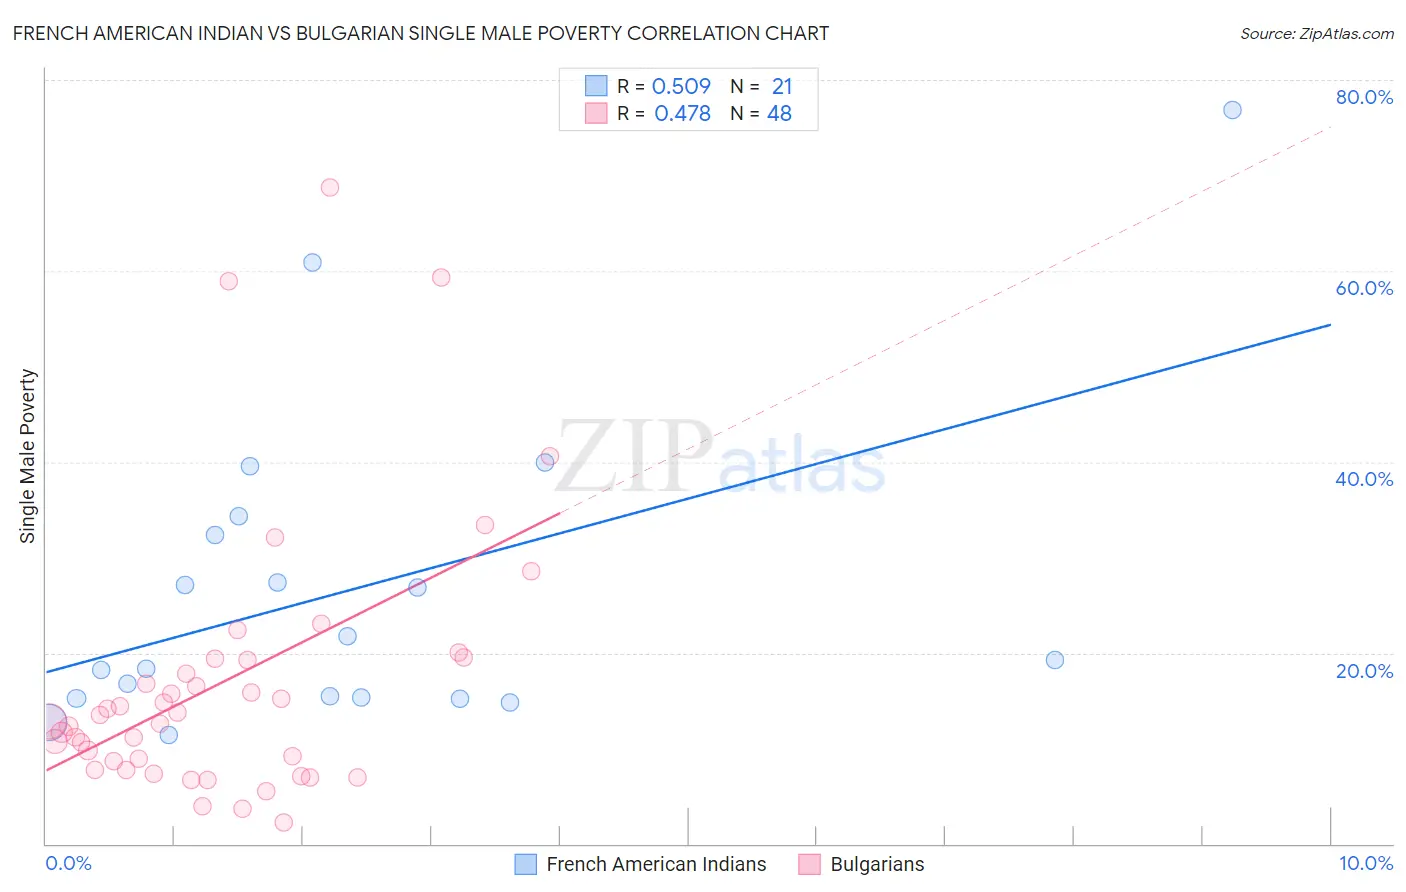 French American Indian vs Bulgarian Single Male Poverty